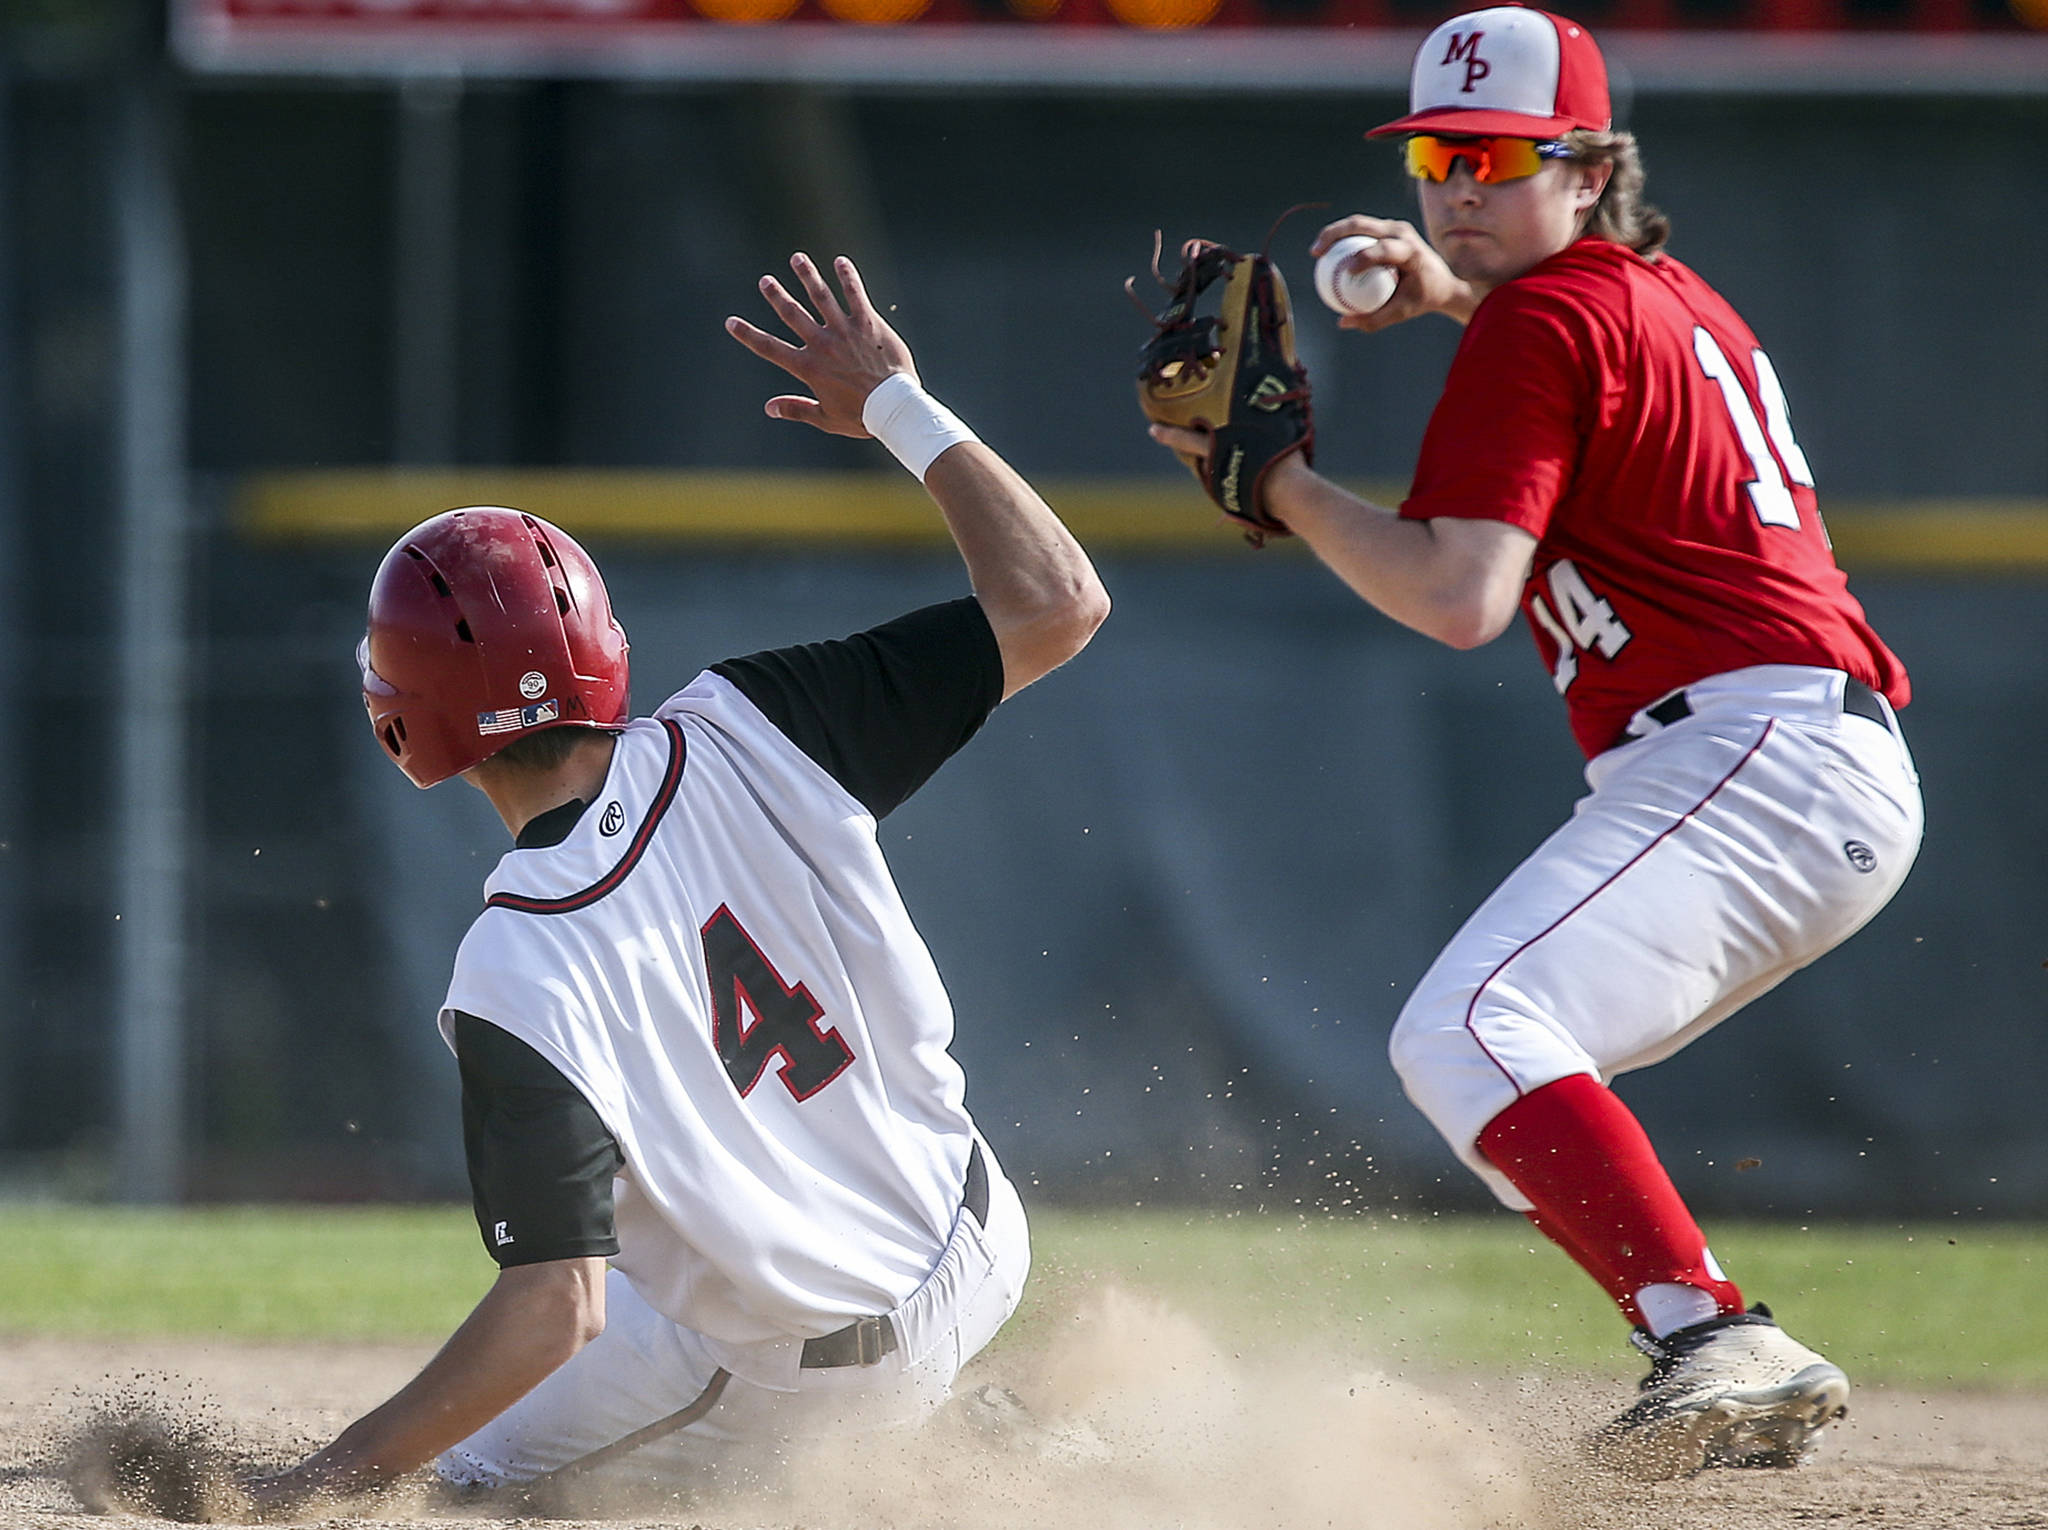 Snohomish’s Adam Ivelia is tagged out by Marysville Pilchuck’s Trevor Anderson attempting a double play at Earl Torgeson Field in Snohomish on May 10. Snohomish won 5-4. (Kevin Clark / The Herald)